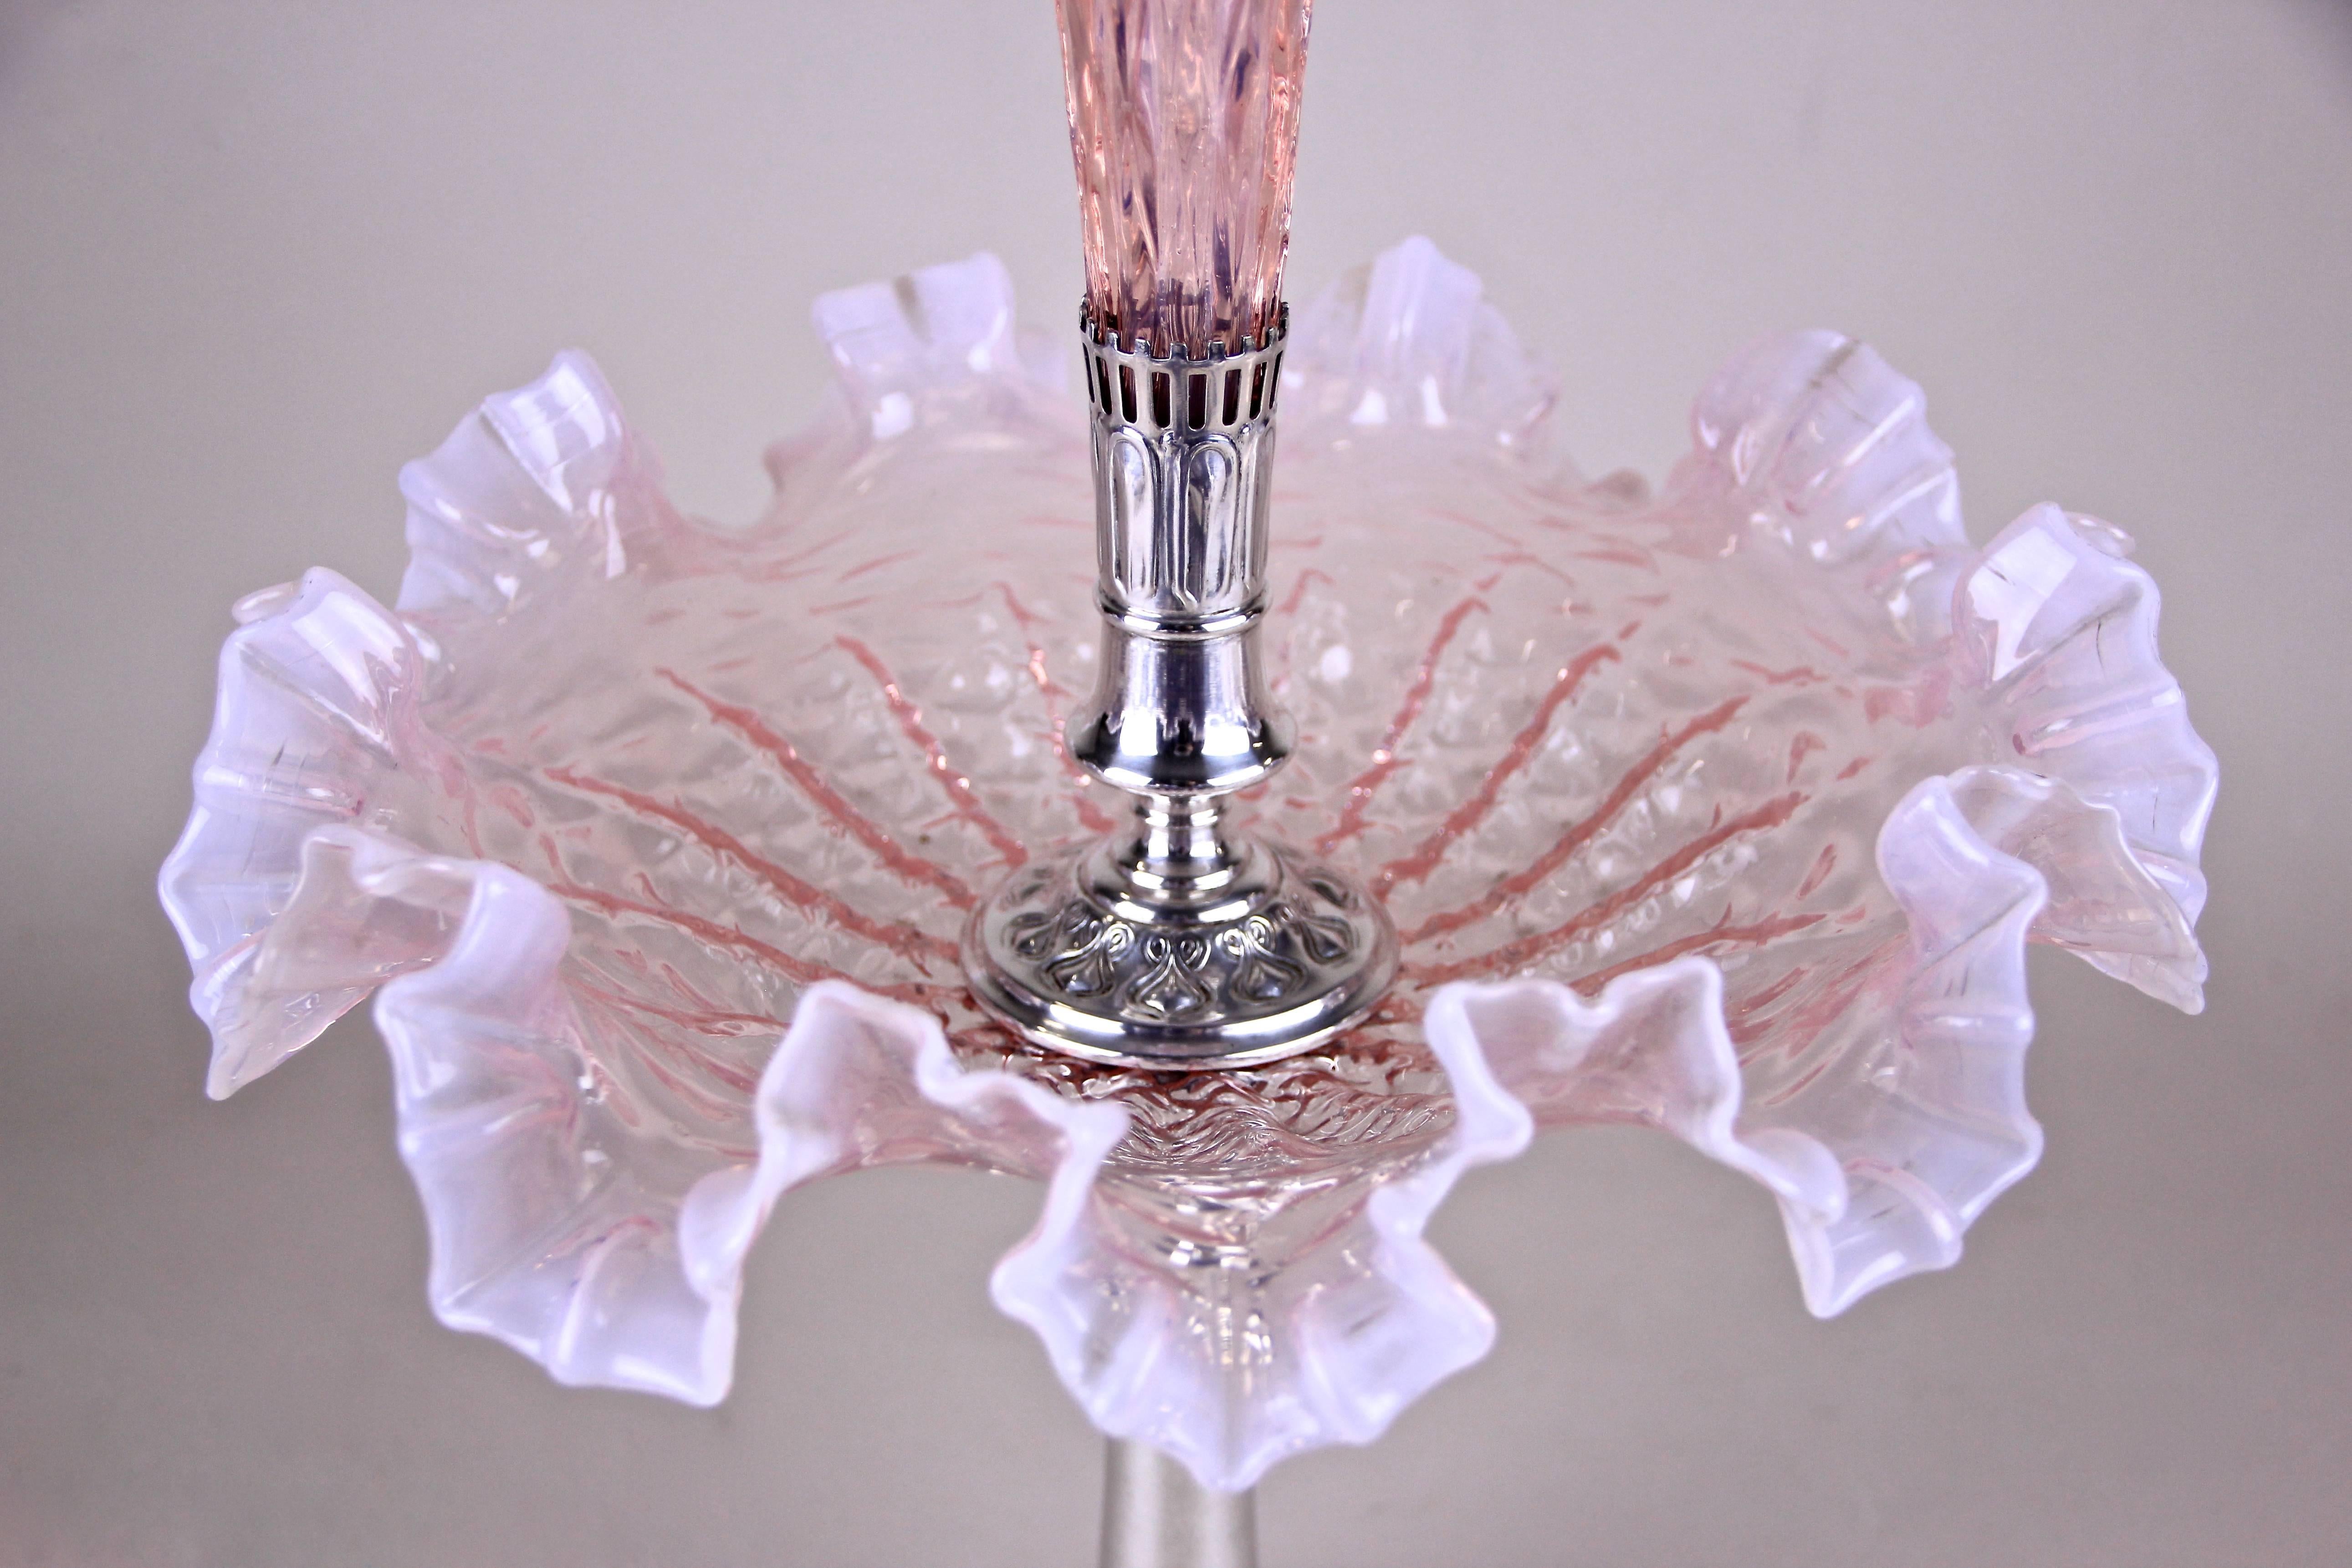 This delightful Art Nouveau Centerpiece was made in the famous city of Vienna by Argentor Austria, circa 1900. The beautiful pastel pink shining mouth blown glass bowl sits on a metal - silver plated centerpiece with great tree embossings around the